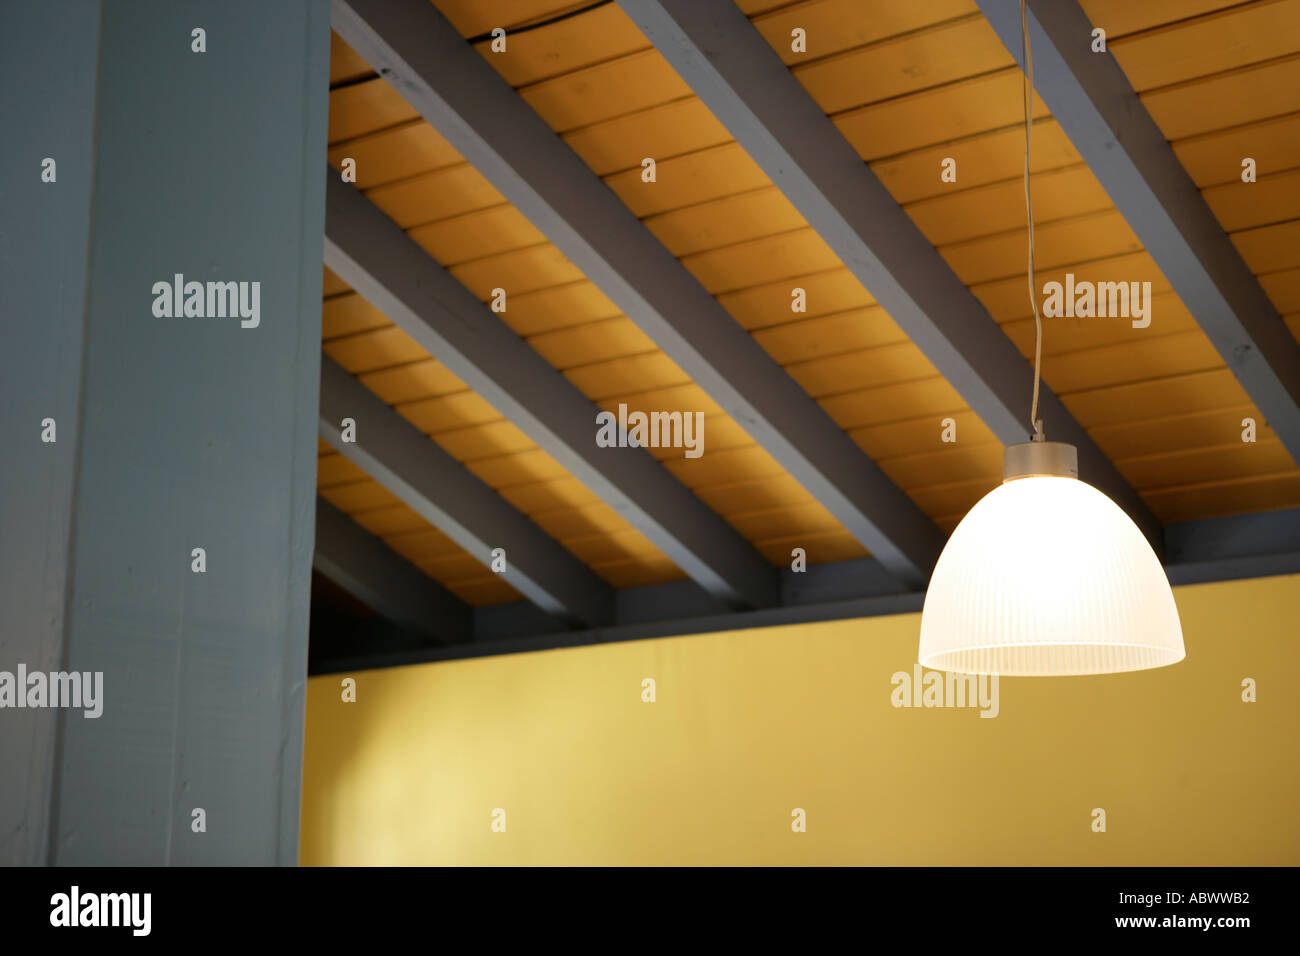 A Slatted Ceiling With Painted Wooden Beams Stock Photo